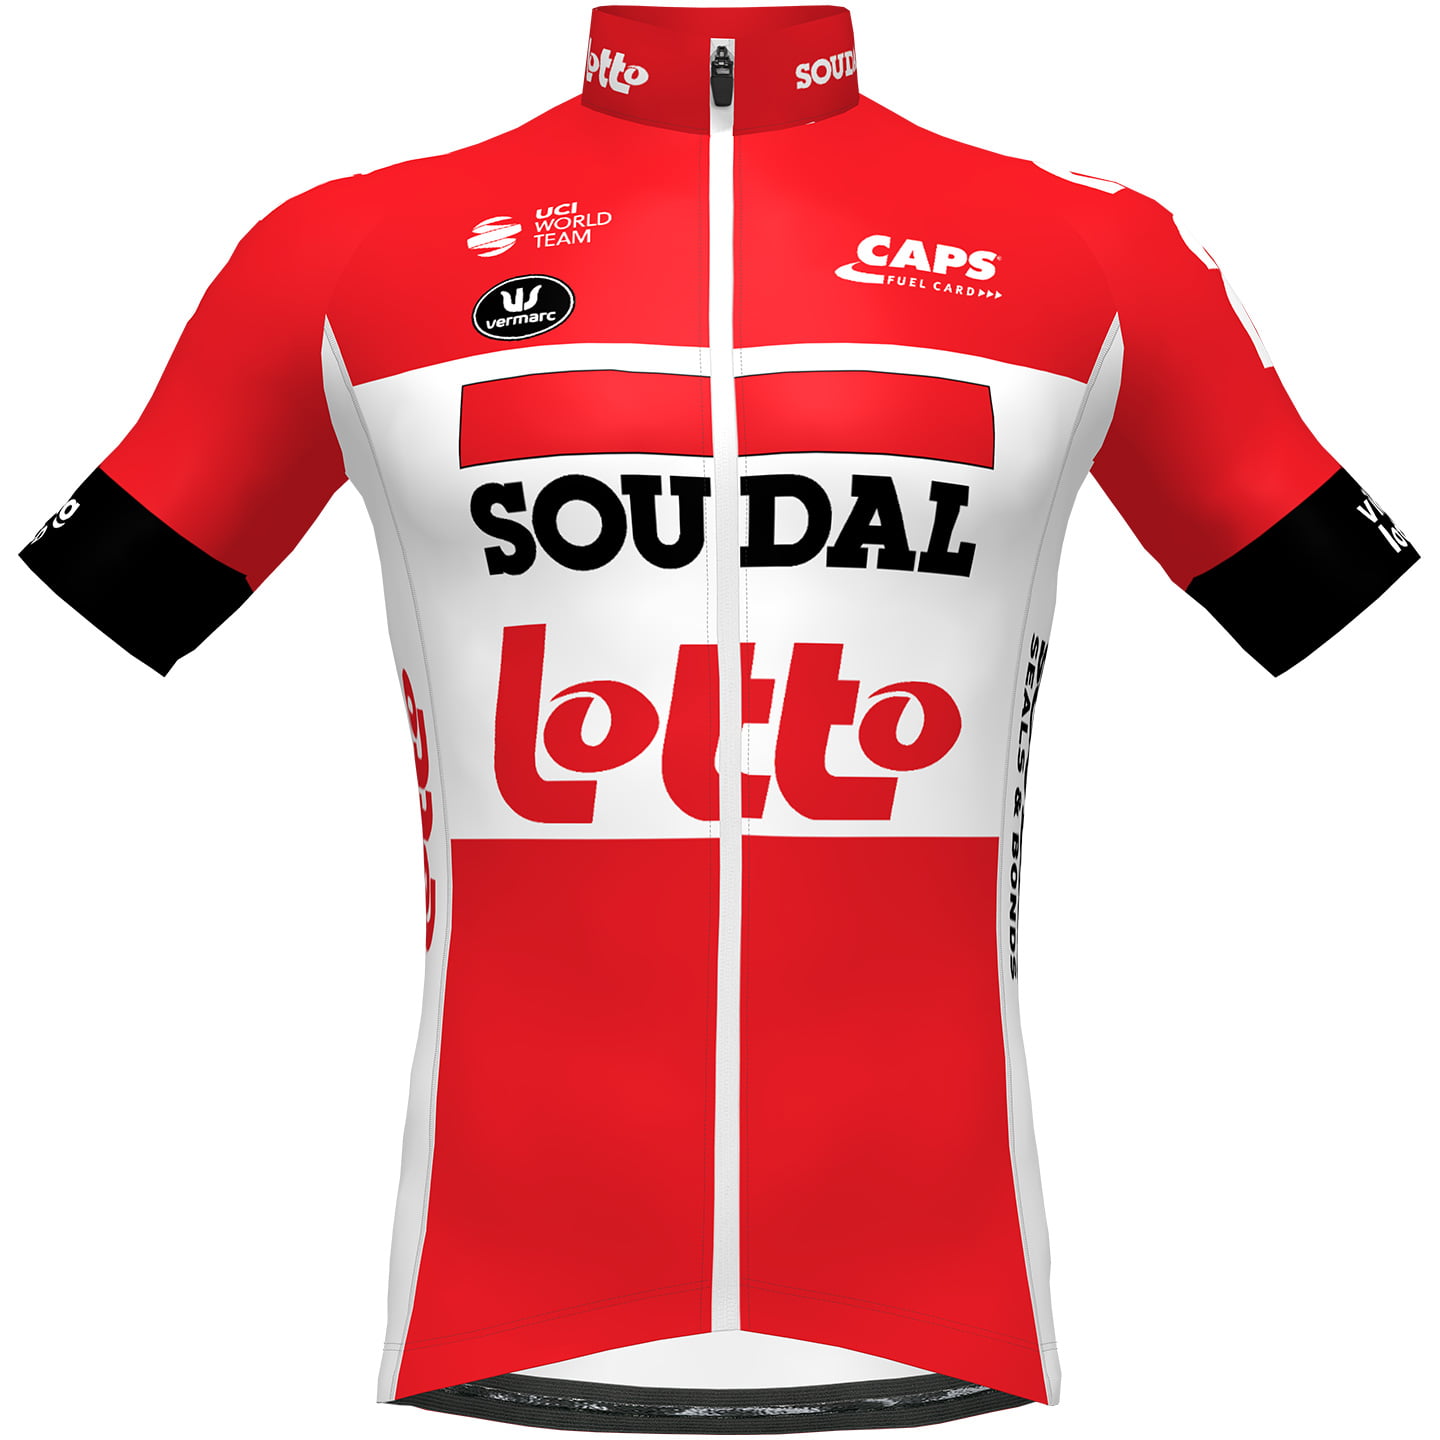 LOTTO SOUDAL Aero 2022 Short Sleeve Jersey, for men, size S, Cycling jersey, Cycling clothing